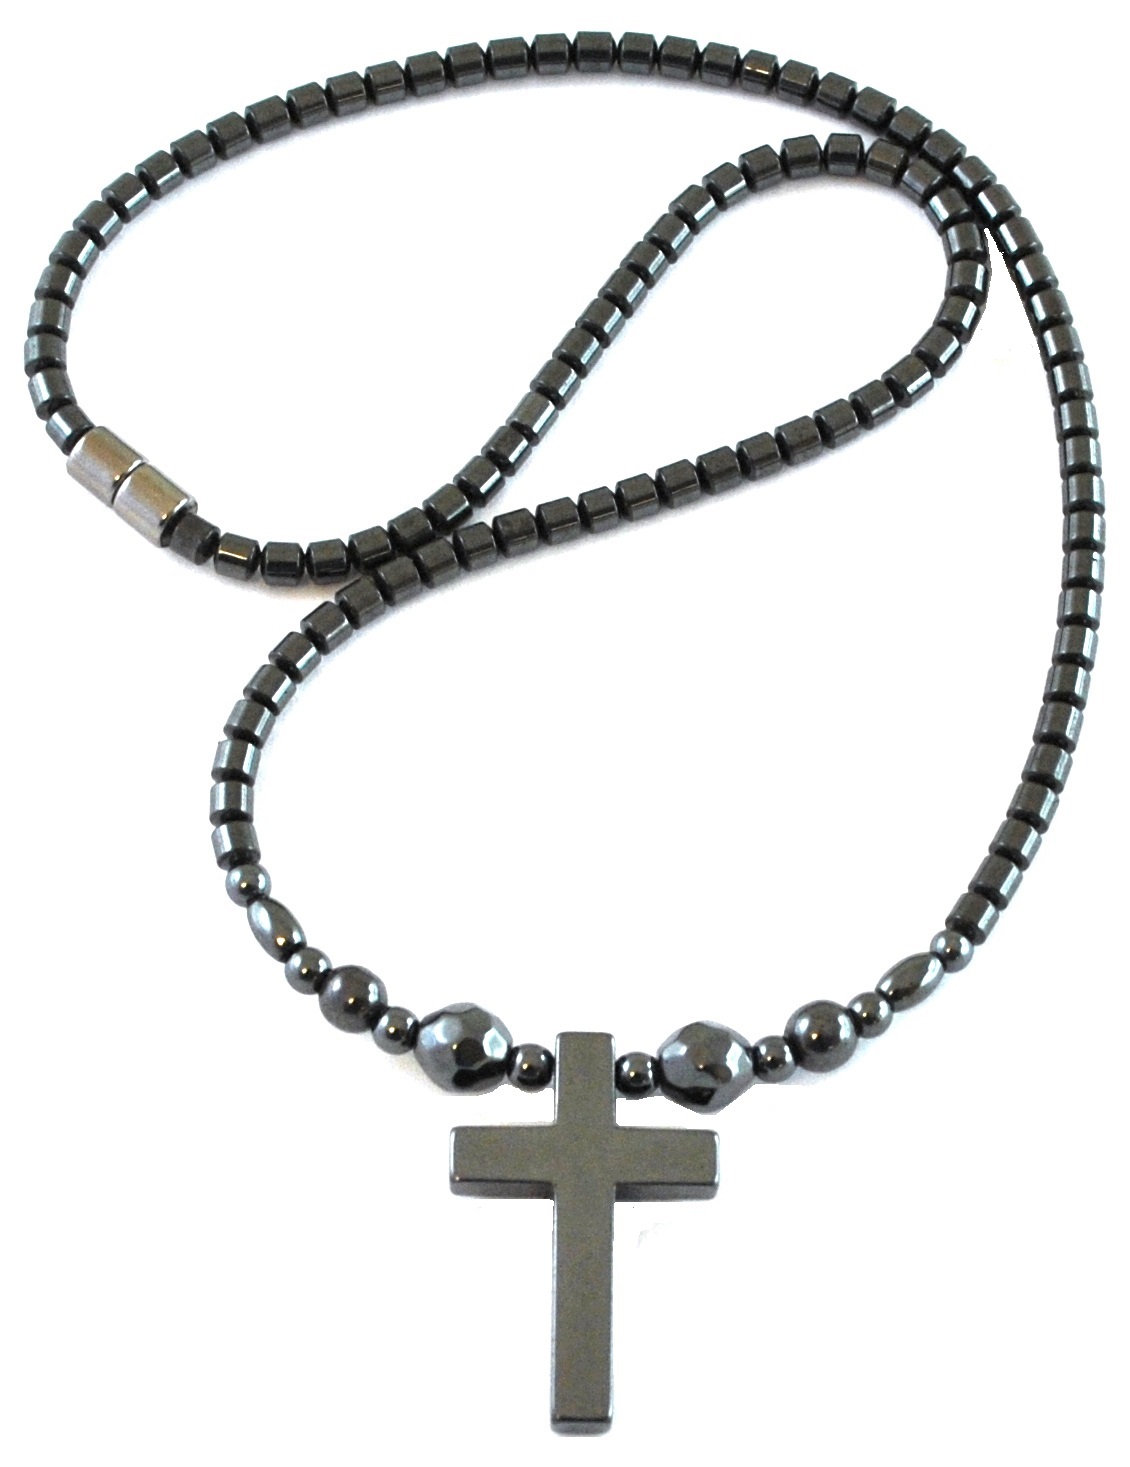 Hematite Cross With Faceted Beads Magnetic Necklace #MN-0111FBK